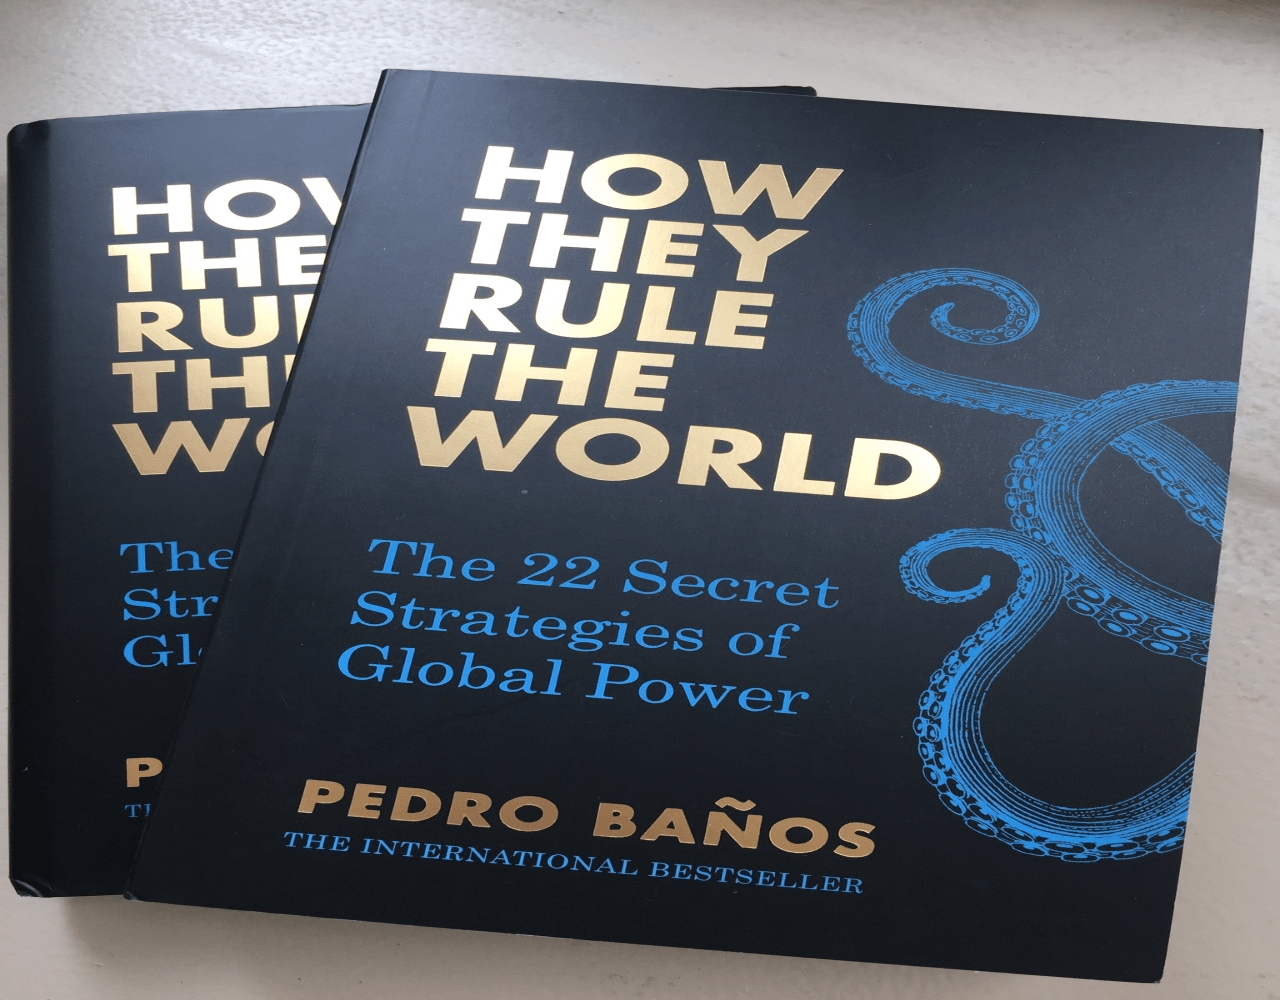 How they rule the world Pedro Banos